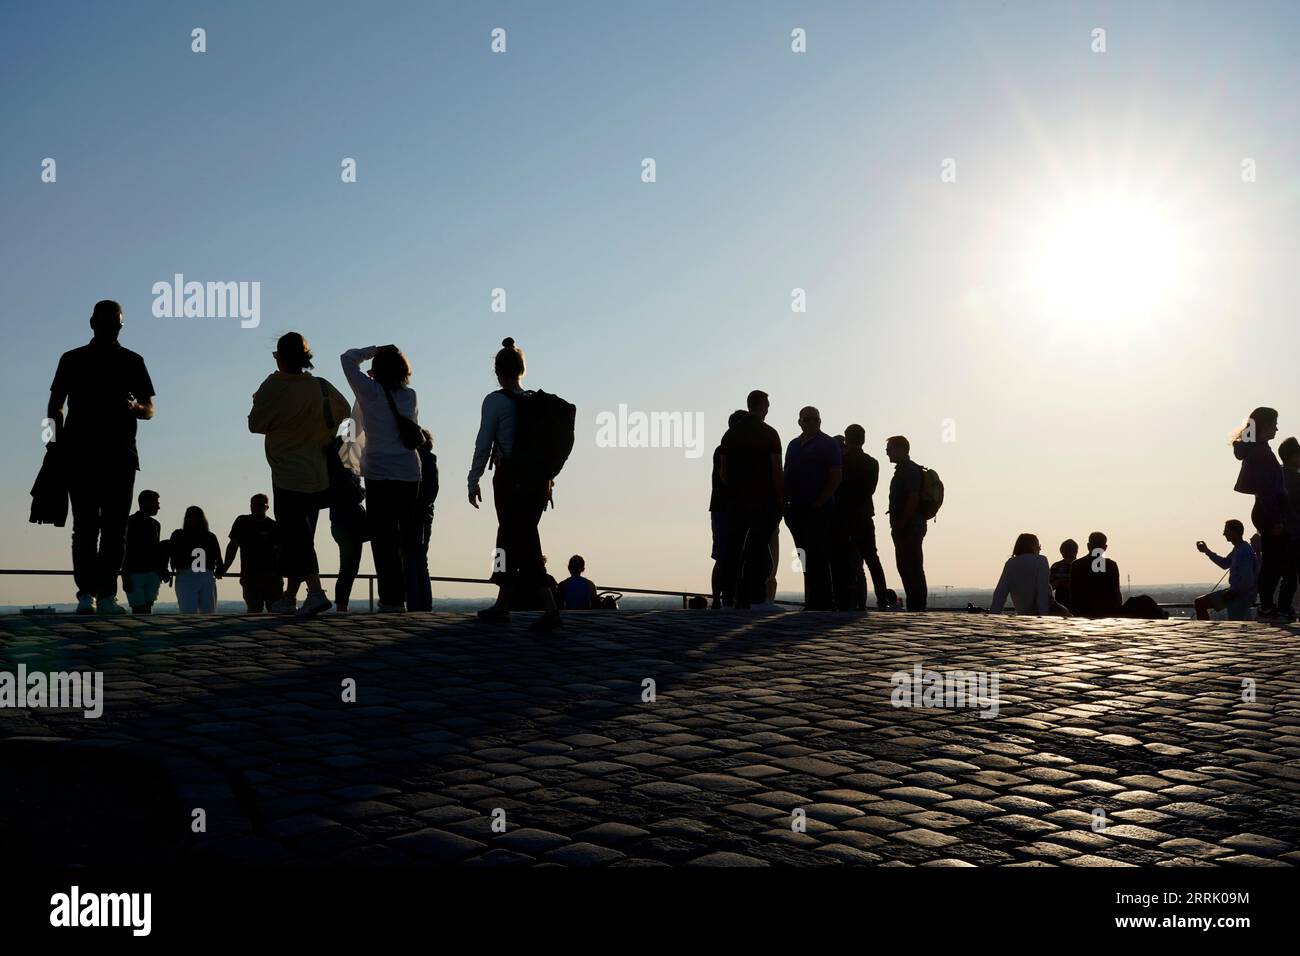 Germany, Bavaria, Munich, Olympic center, Olympiaberg, evening sun, group of people, silhouette Stock Photo